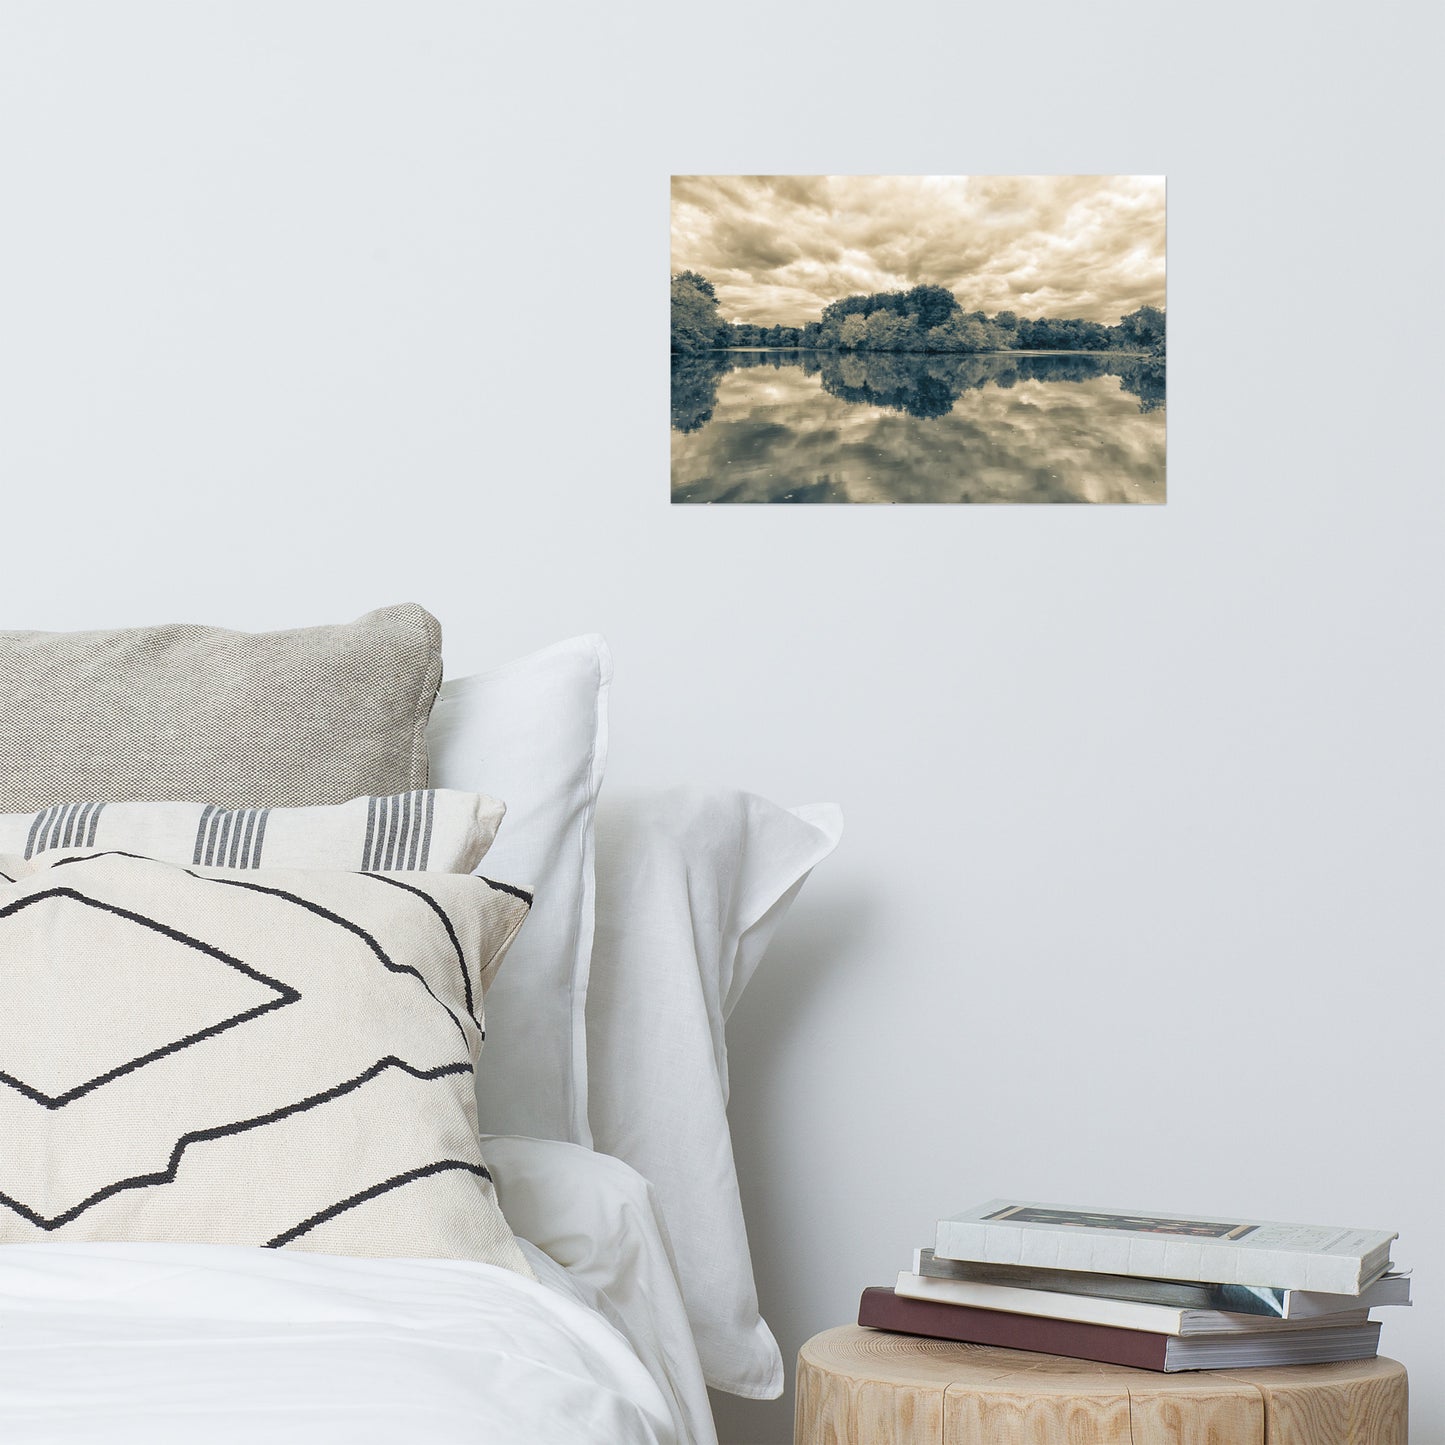 Unique Art For Bedroom: Fall Trees on Edge of Pond With Stormy Sky Split Tone - Rural / Country Style Landscape / Nature Loose / Unframed / Frameless / Frameable Photograph Wall Art Print - Artwork